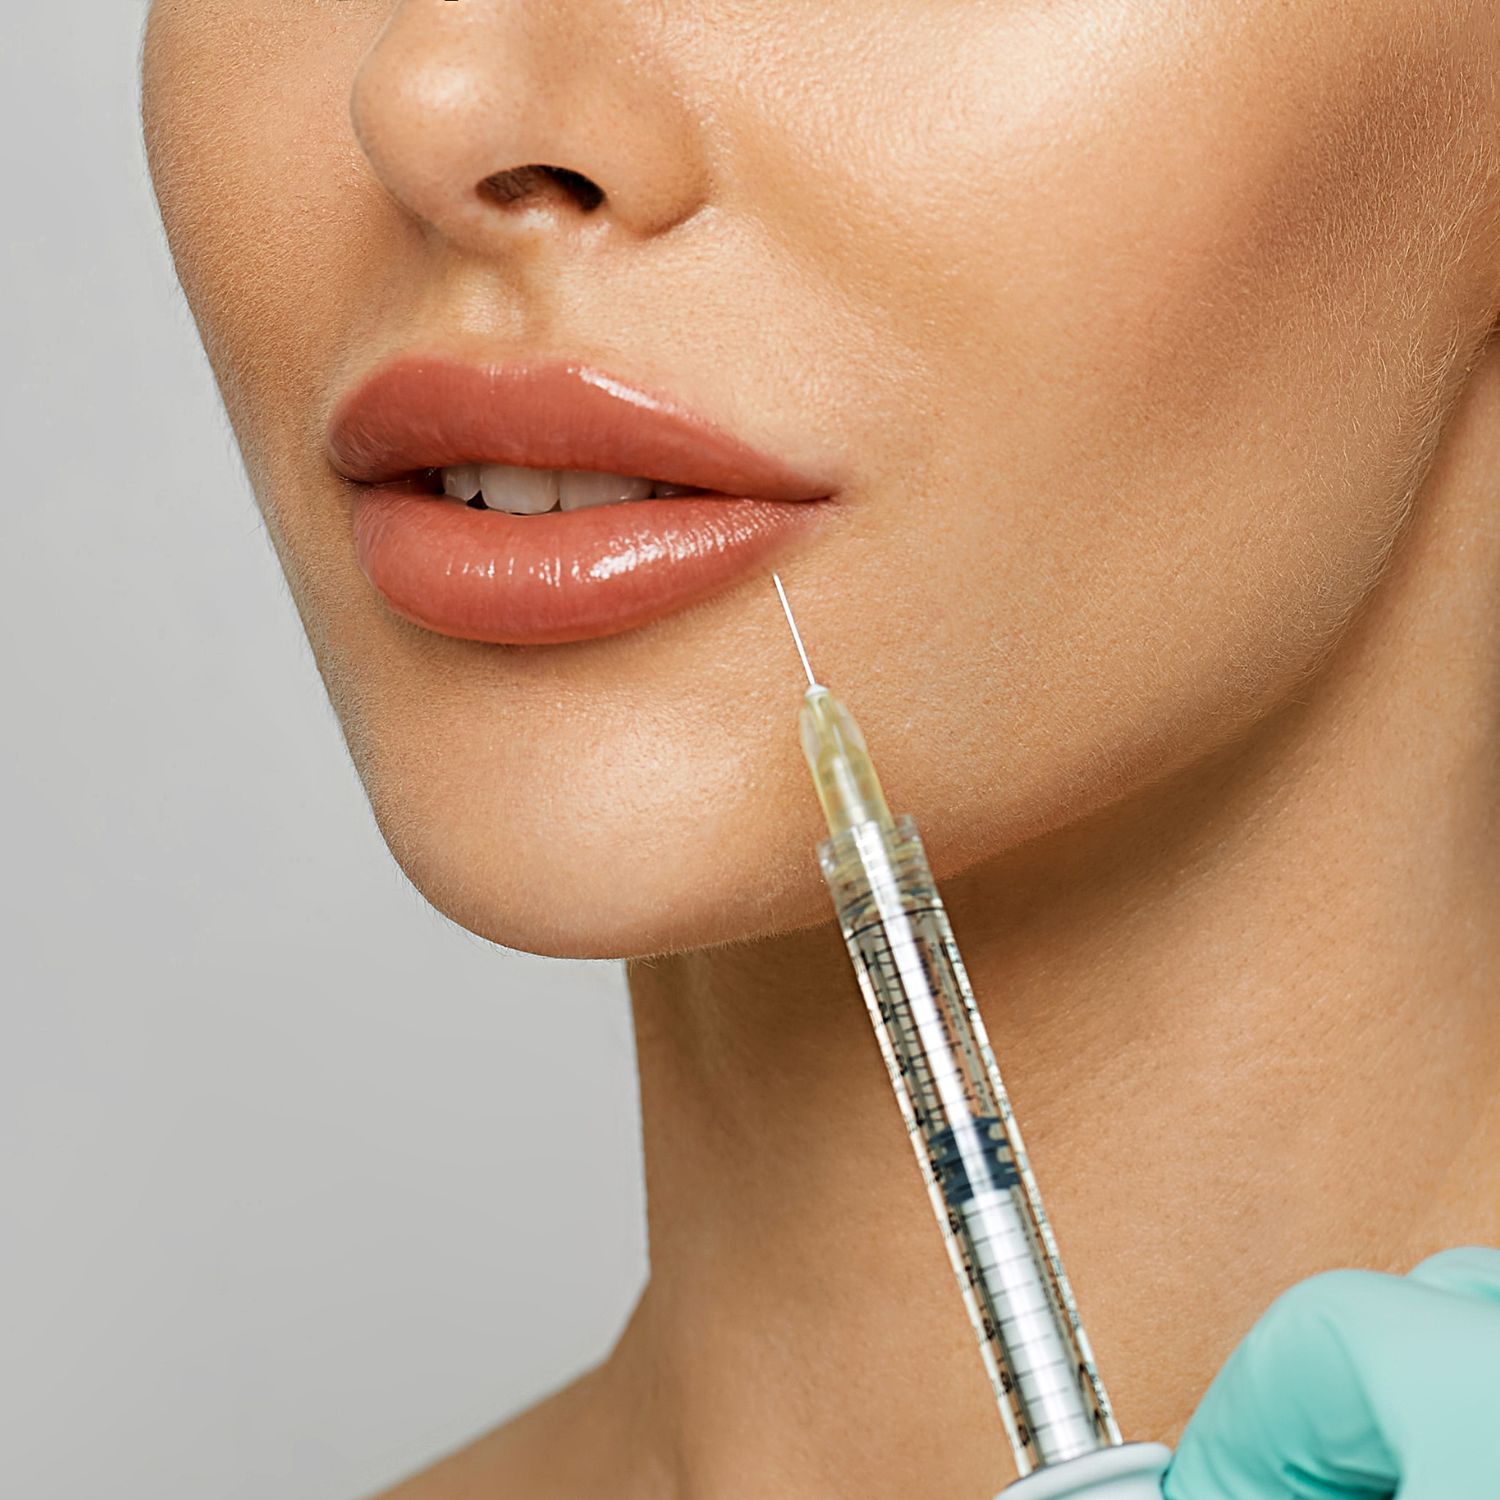 Everything you need to know about lip filler migration, as told by the experts